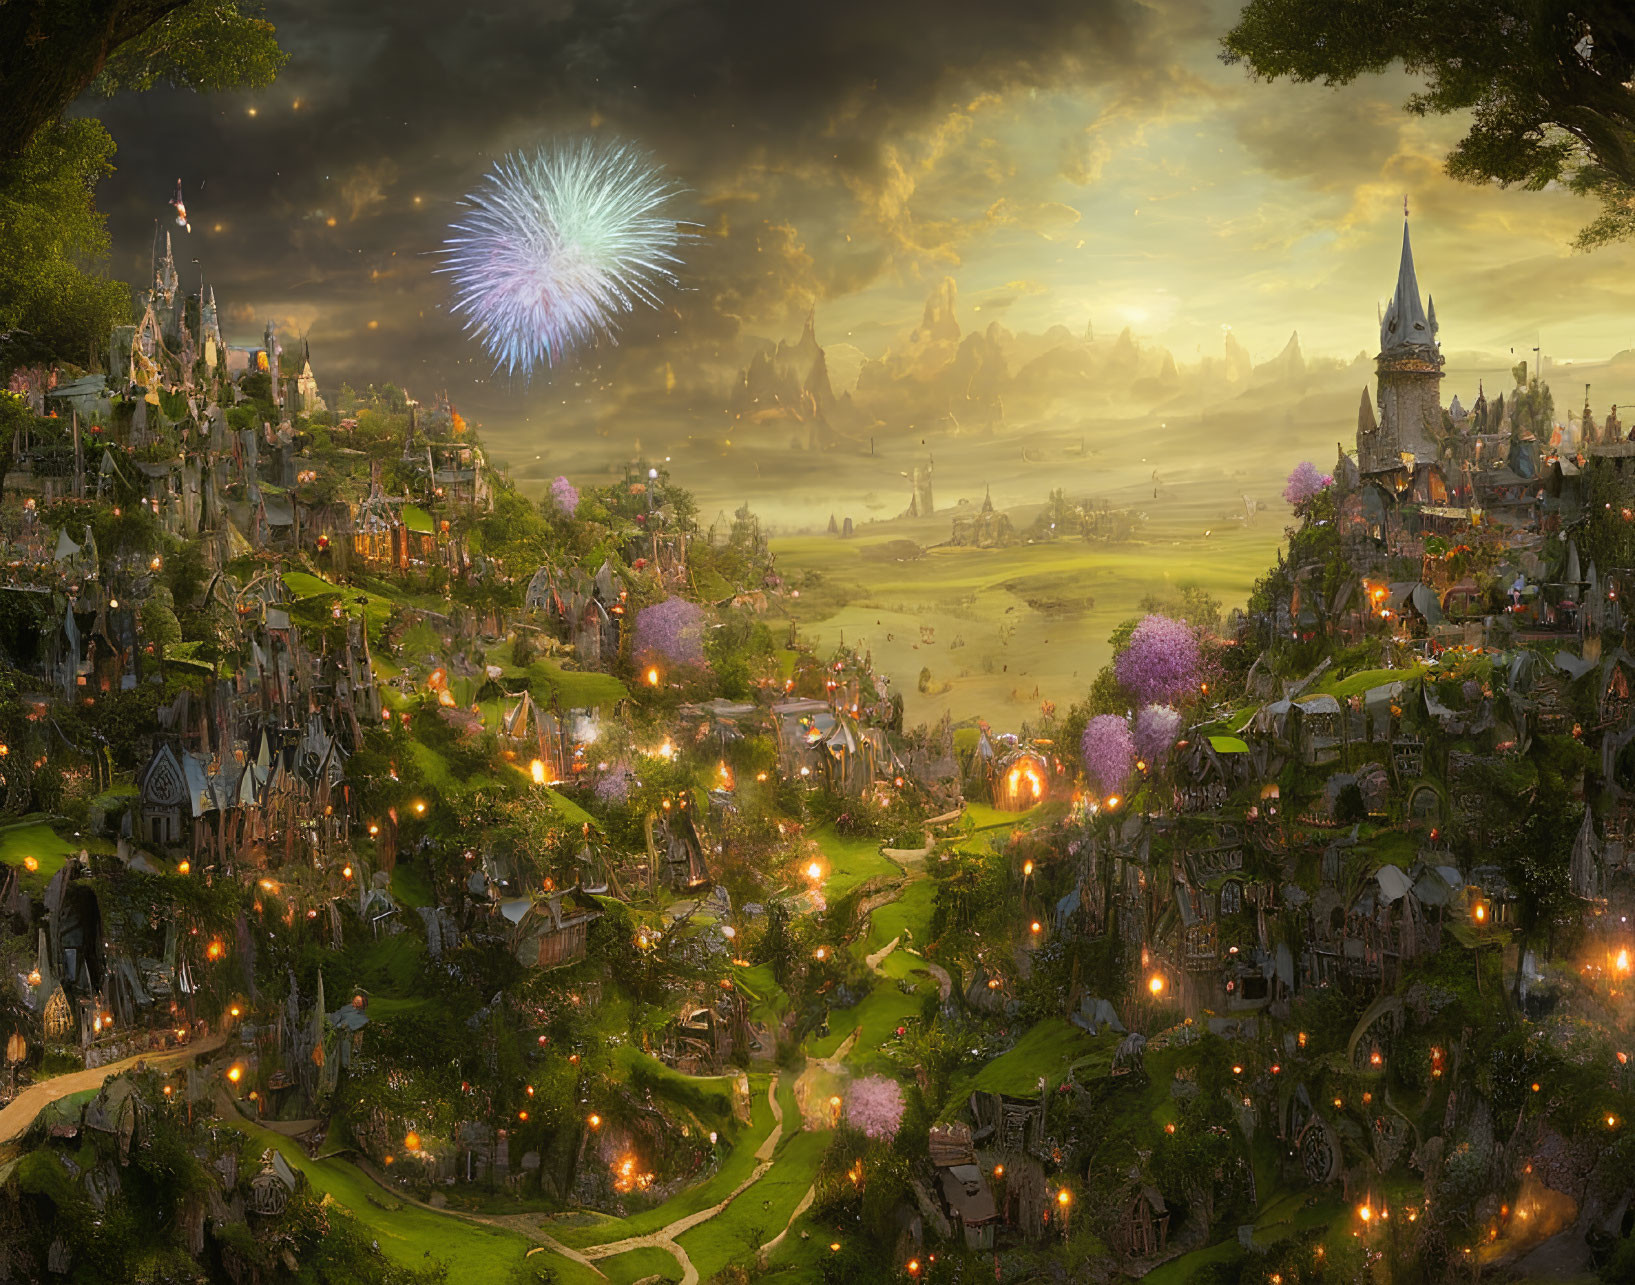 Fantasy landscape with castle, houses, fireworks, and lush trees at dusk